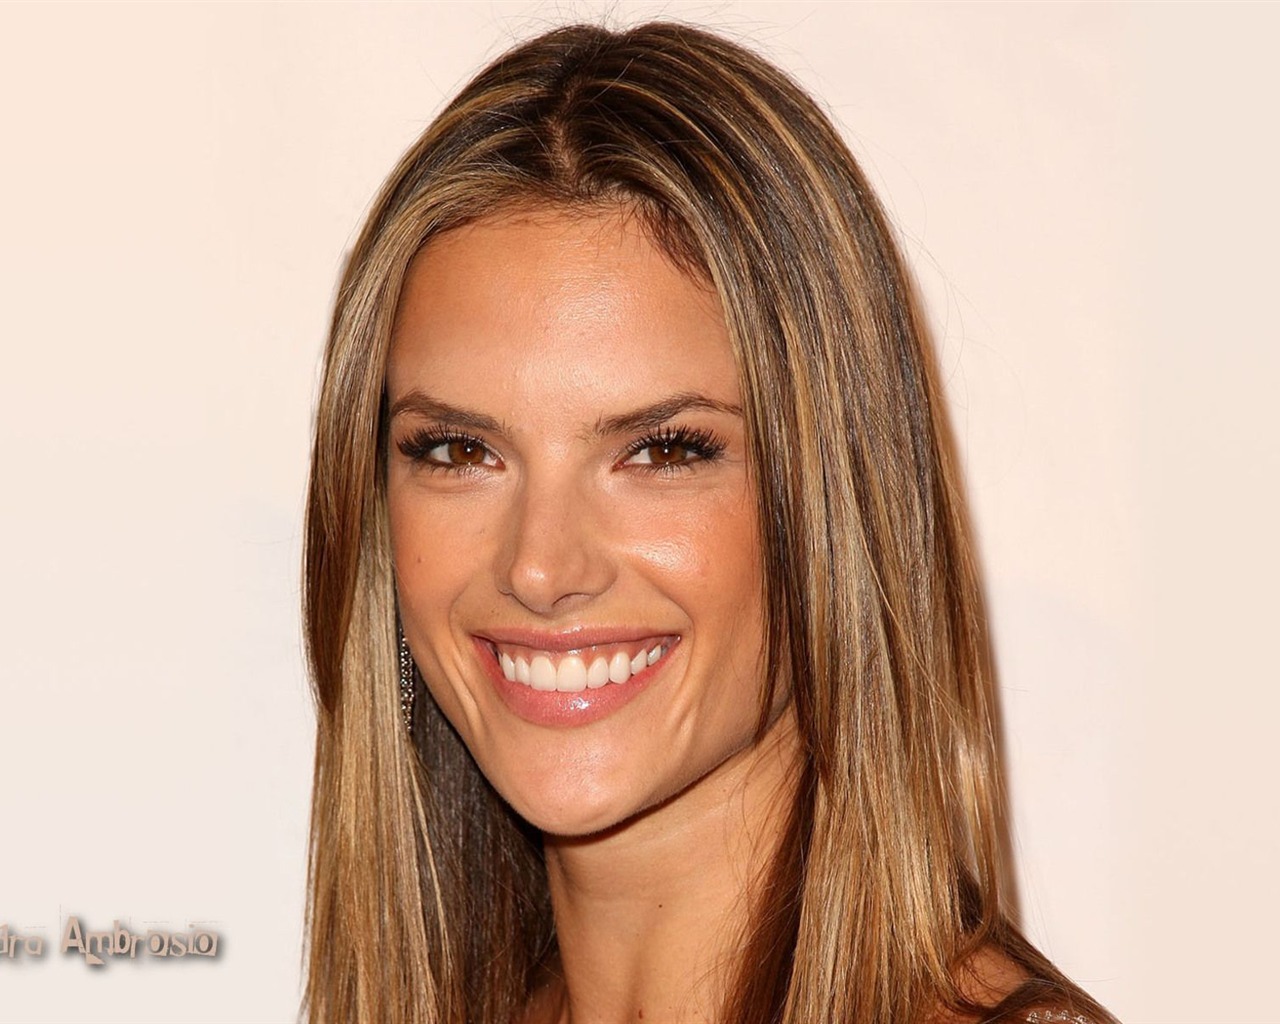 Alessandra Ambrosio #069 - 1280x1024 Wallpapers Pictures Photos Images